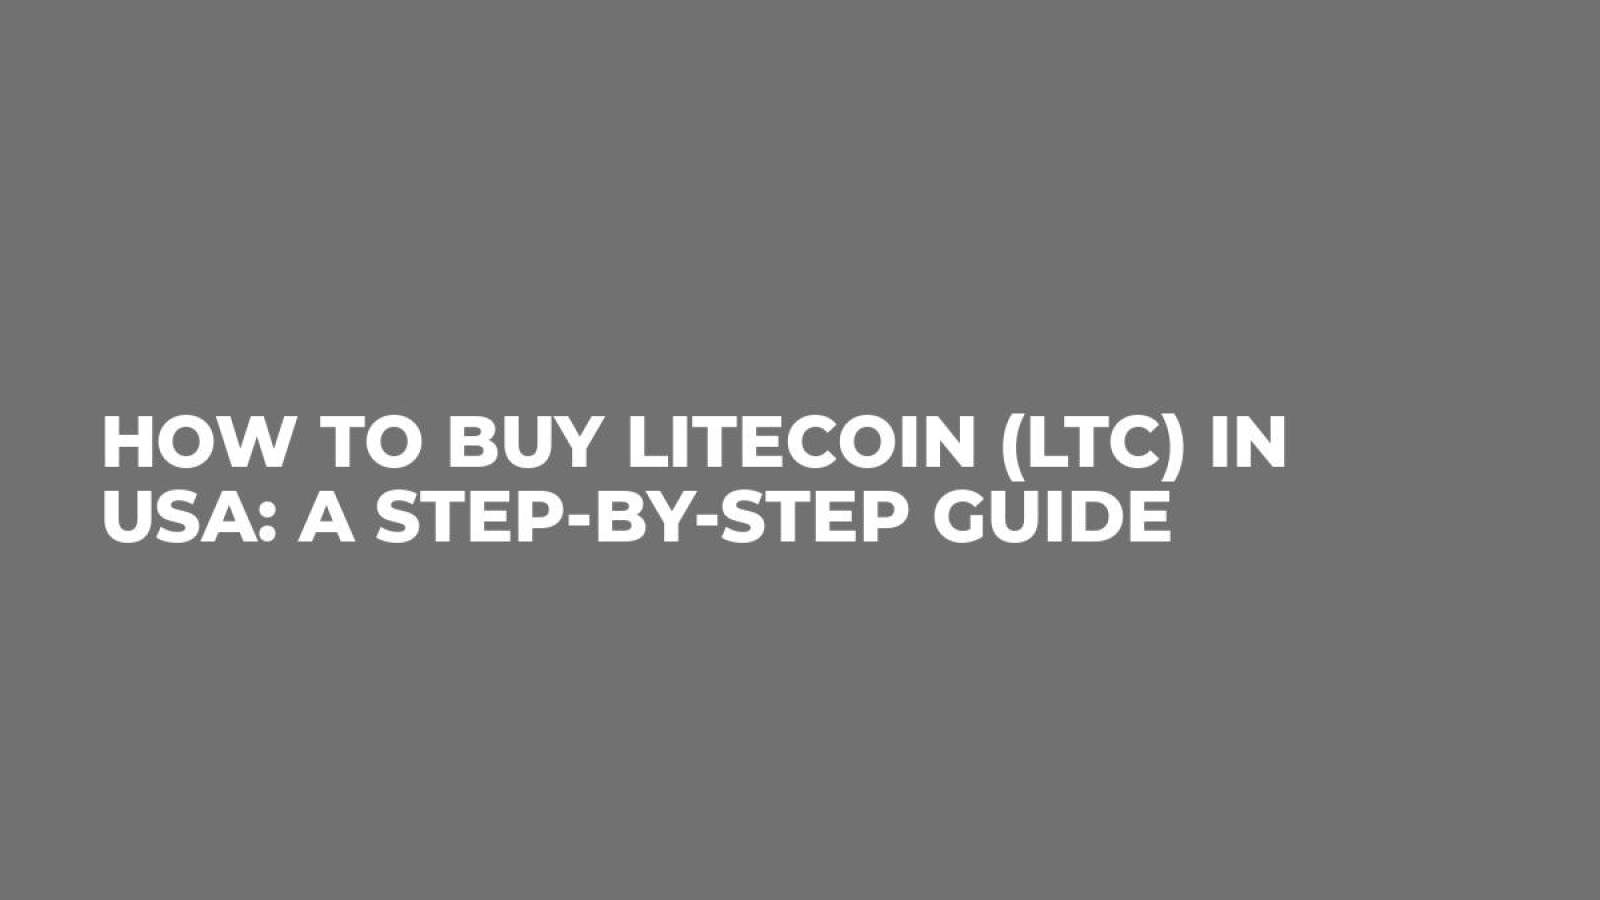 How to buy Litecoin (LTC) in USA: A Step-by-Step Guide